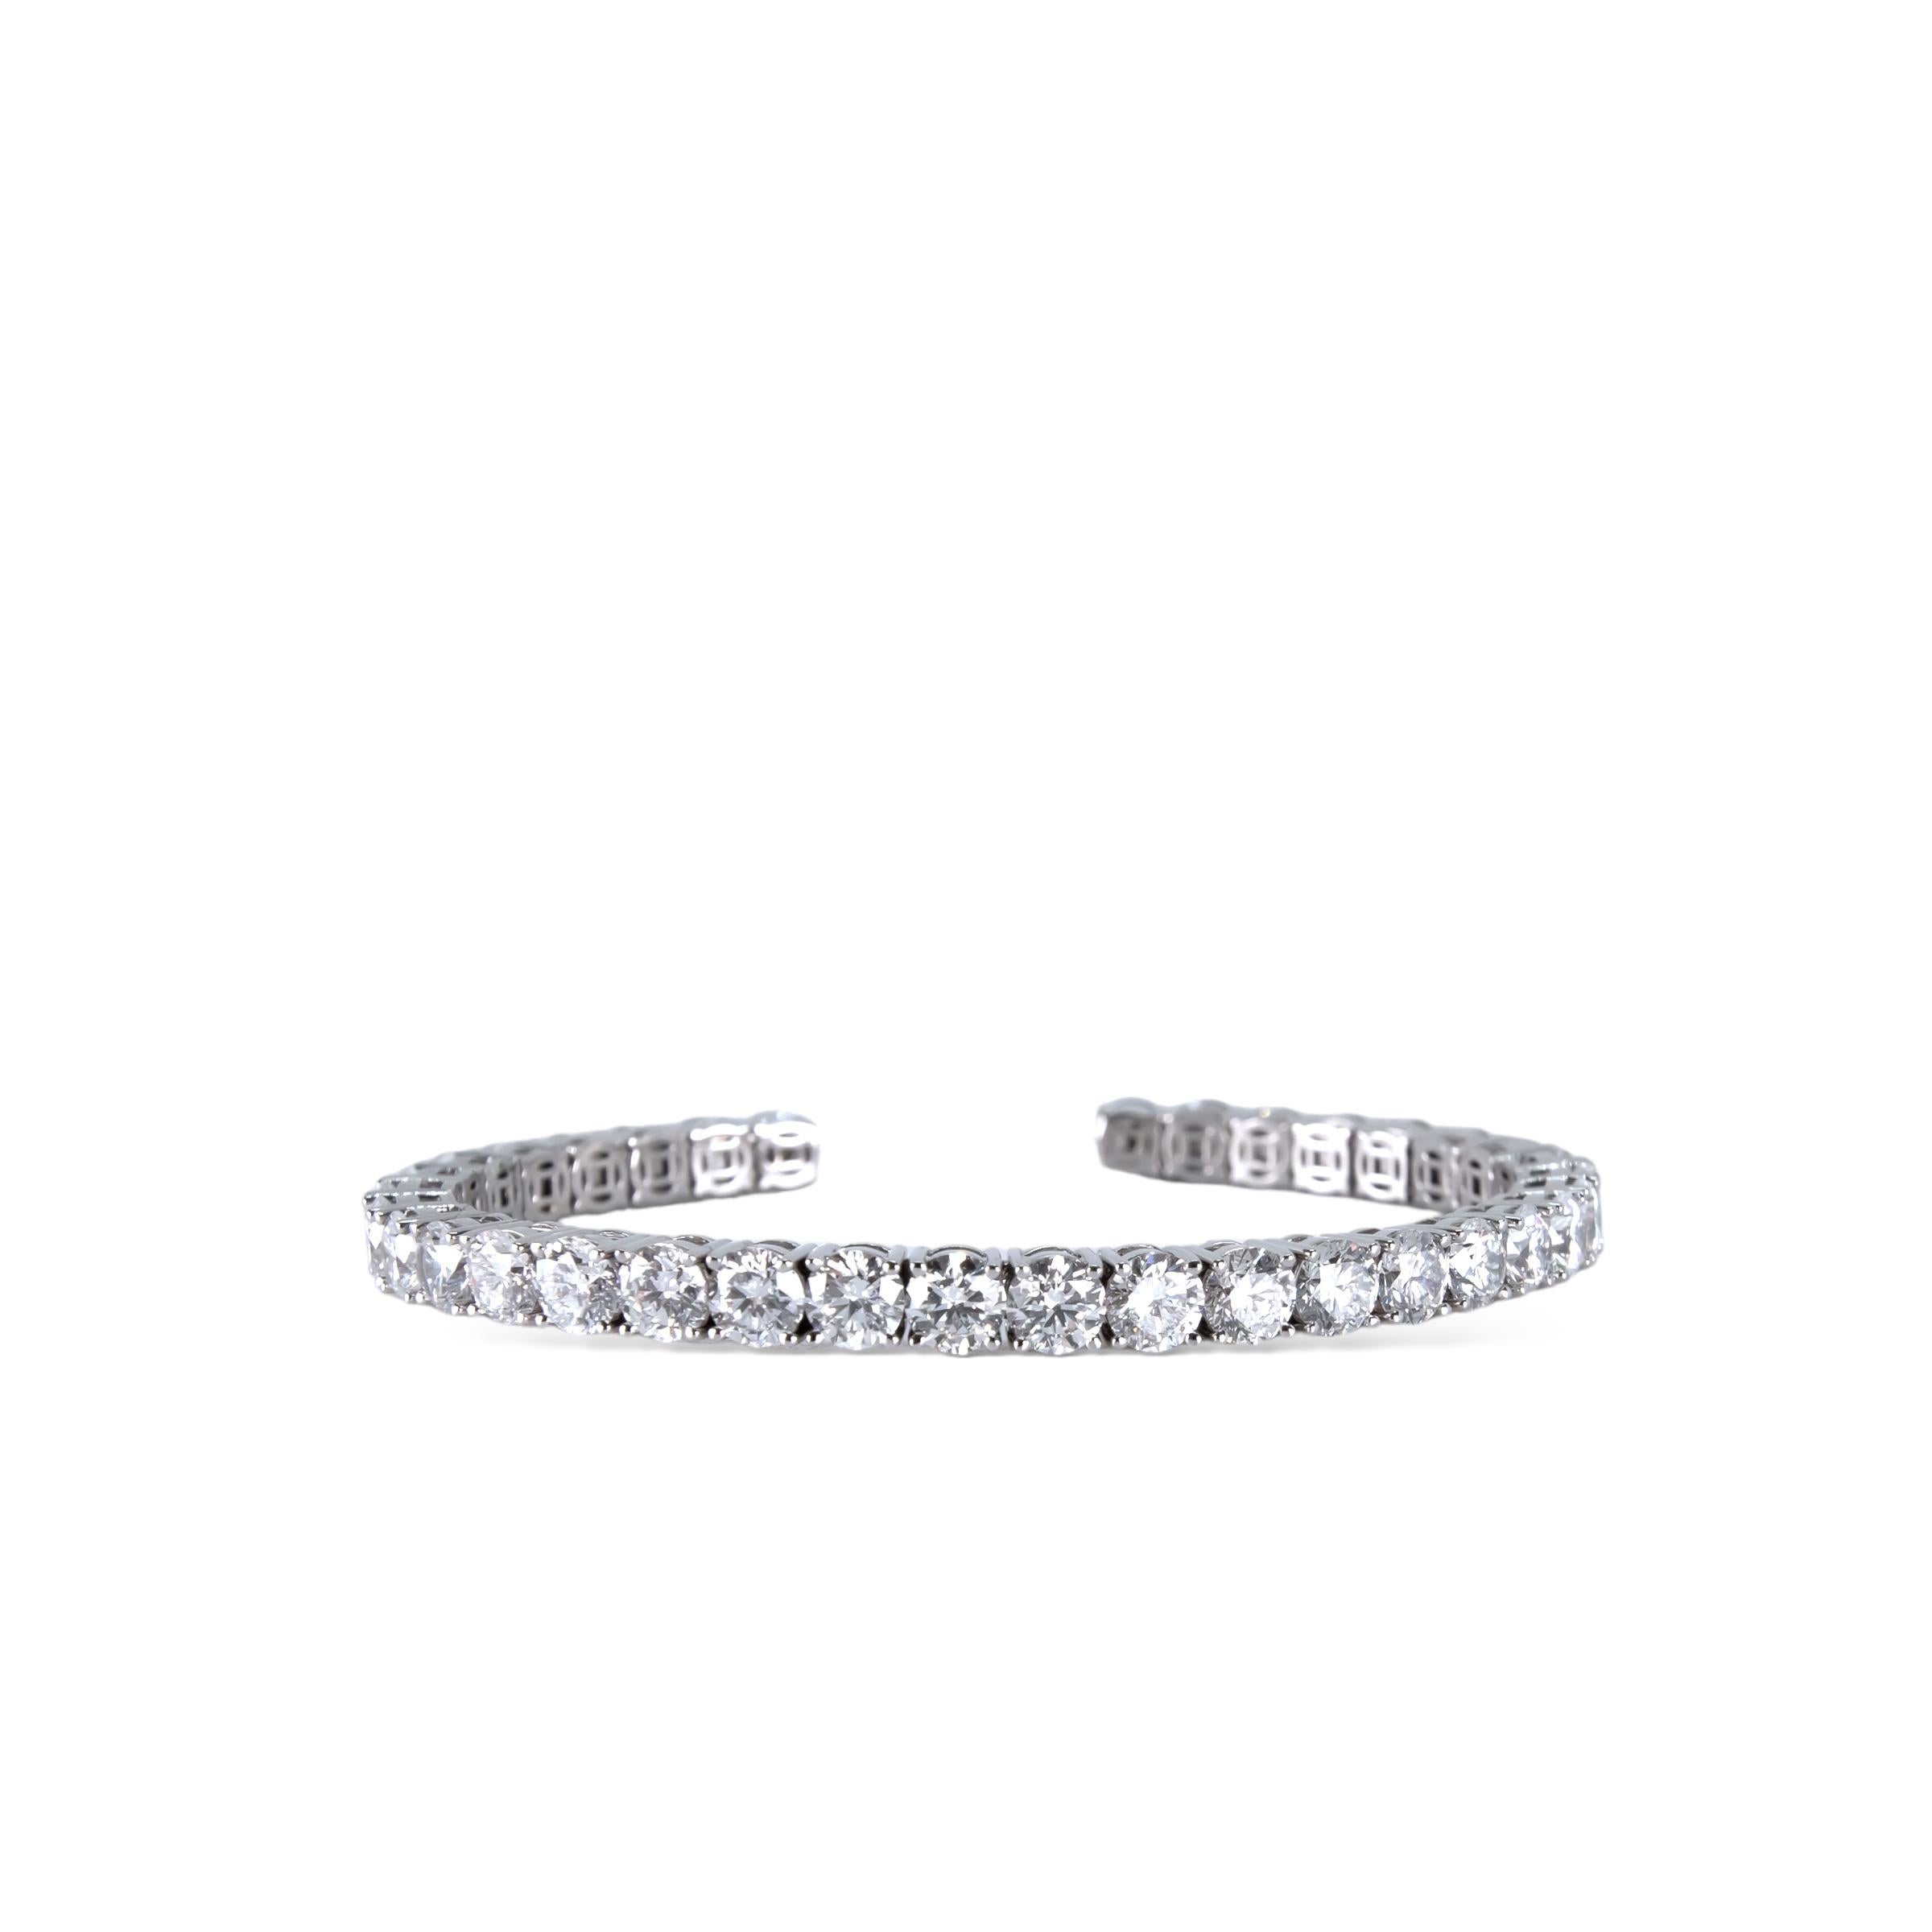 Over 11 carat diamond tennis bracelet flexible bangle, set with hand selected natural EF colour and VS clarity diamonds in your choice of 18k gold or platinum. 

All of our diamonds are hand selected and perfectly matched, and are of high quality